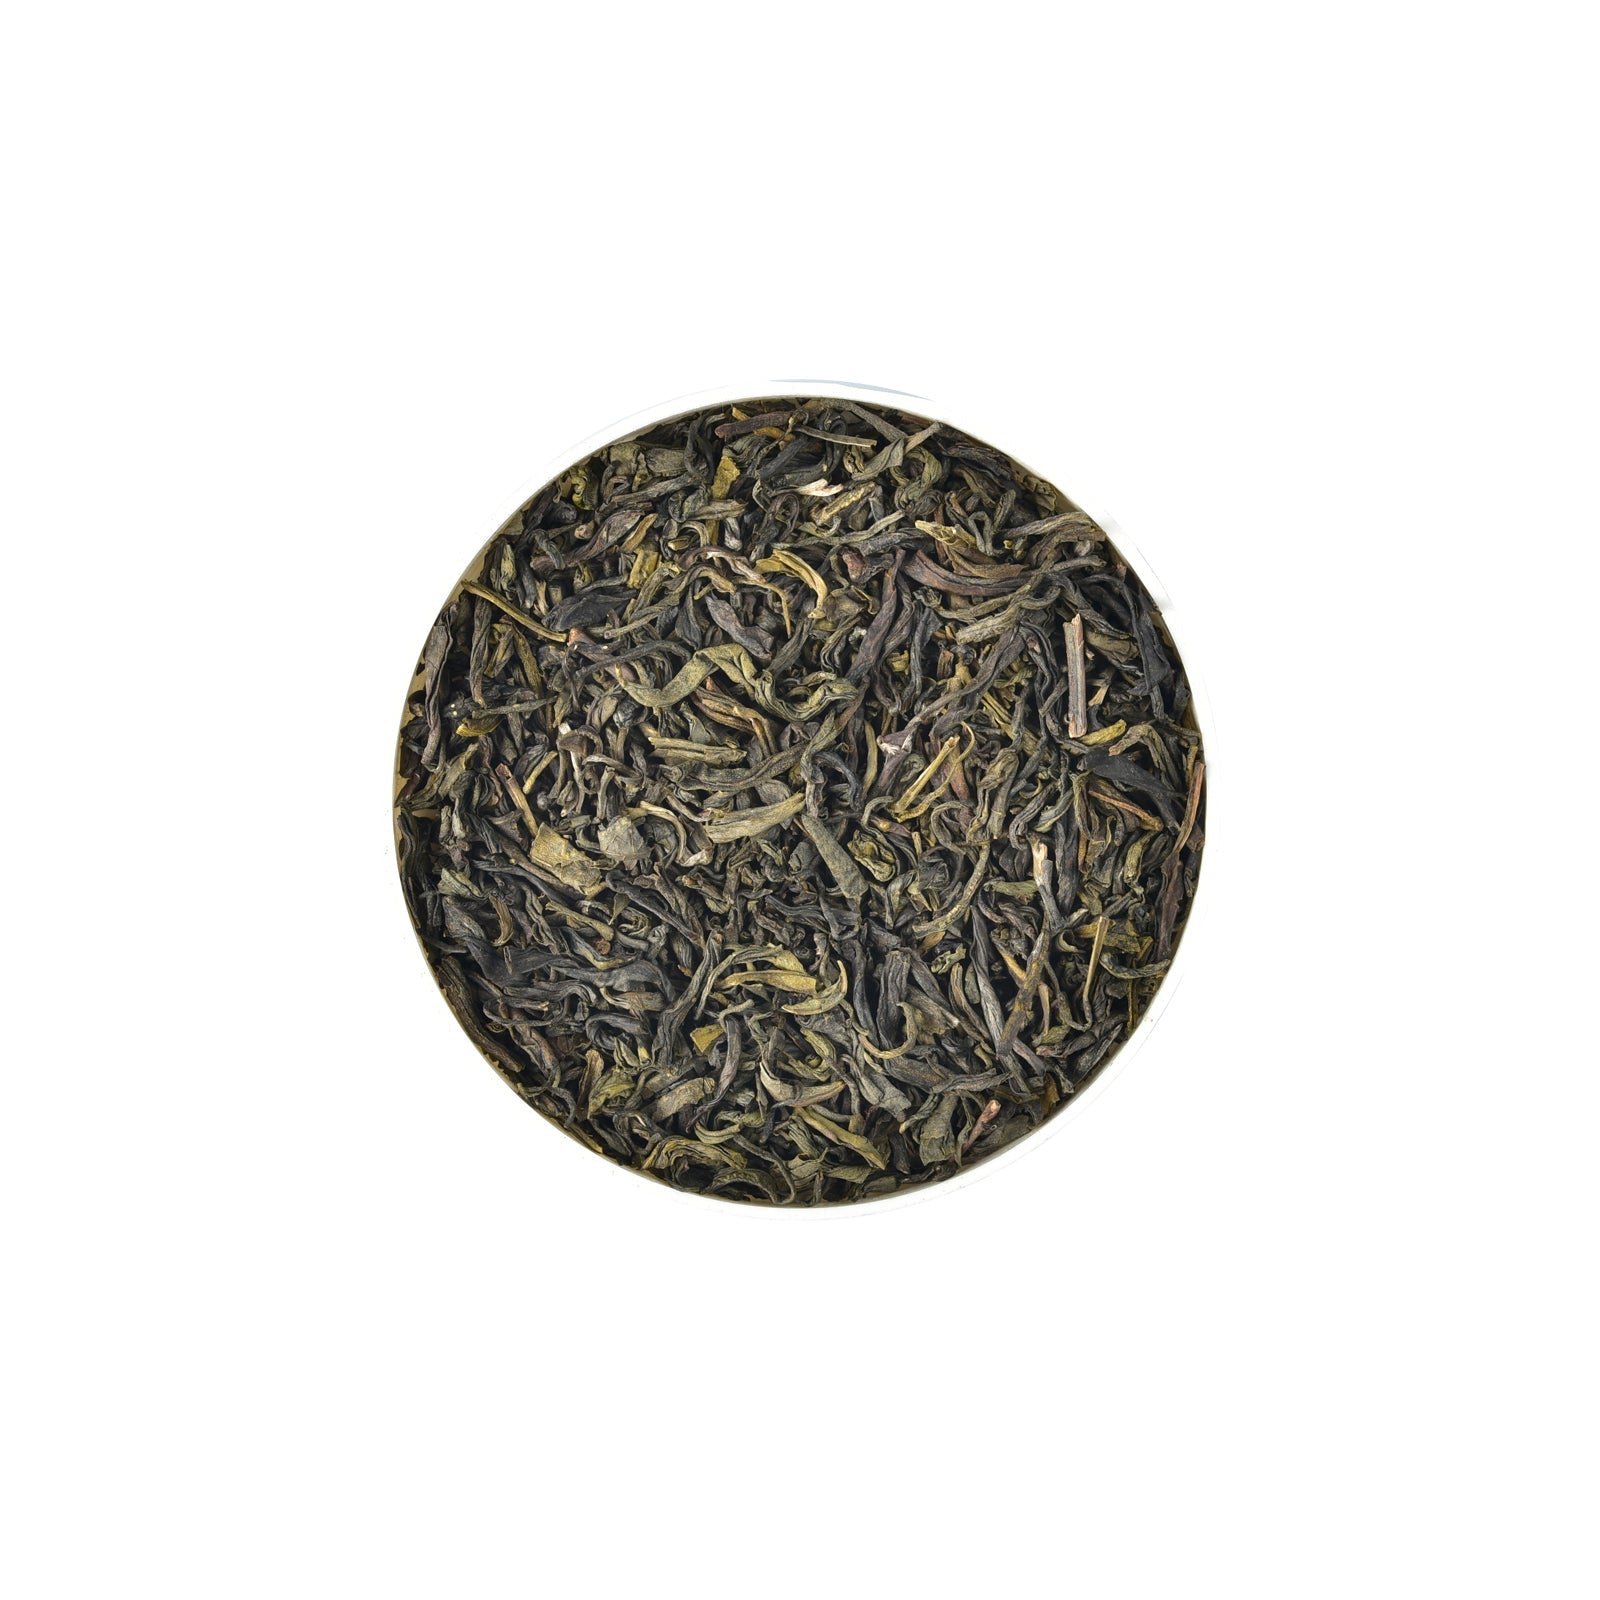 TPR Imperial China Natural Jasmine Green Tea Caddy-150g Loose Leaf